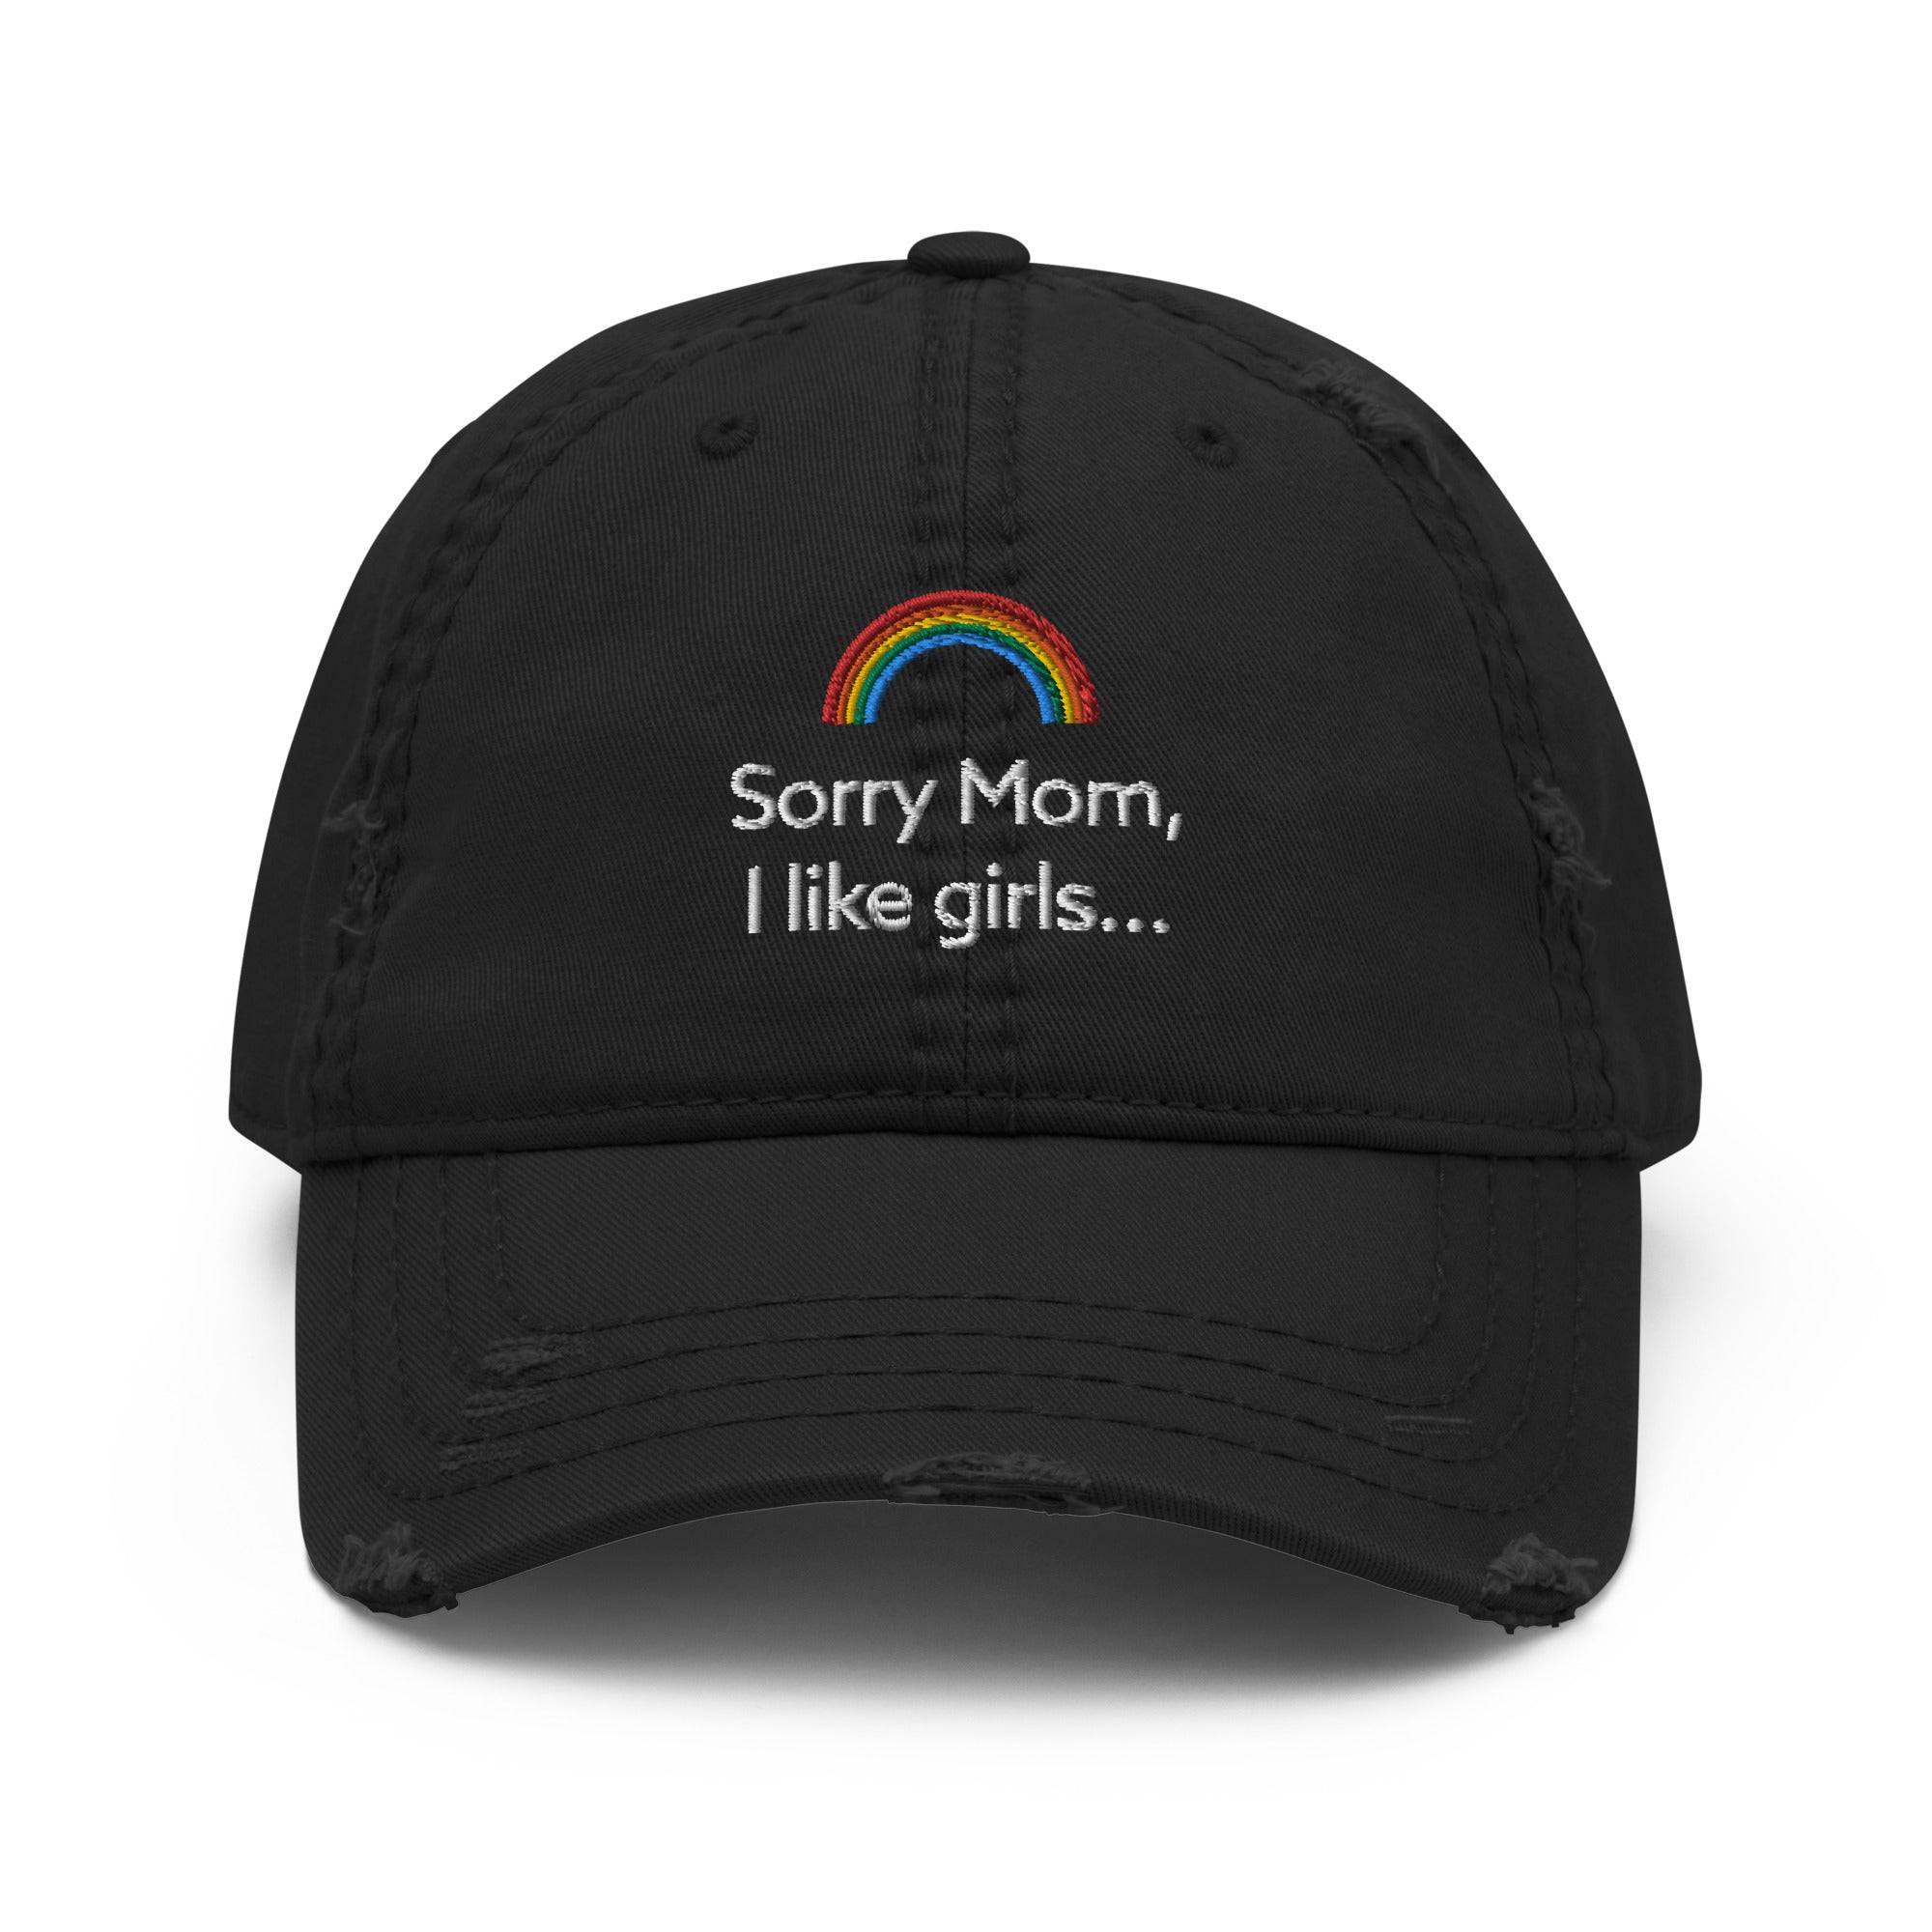 Sorry Mom I like girls Embroidered Distressed Hat